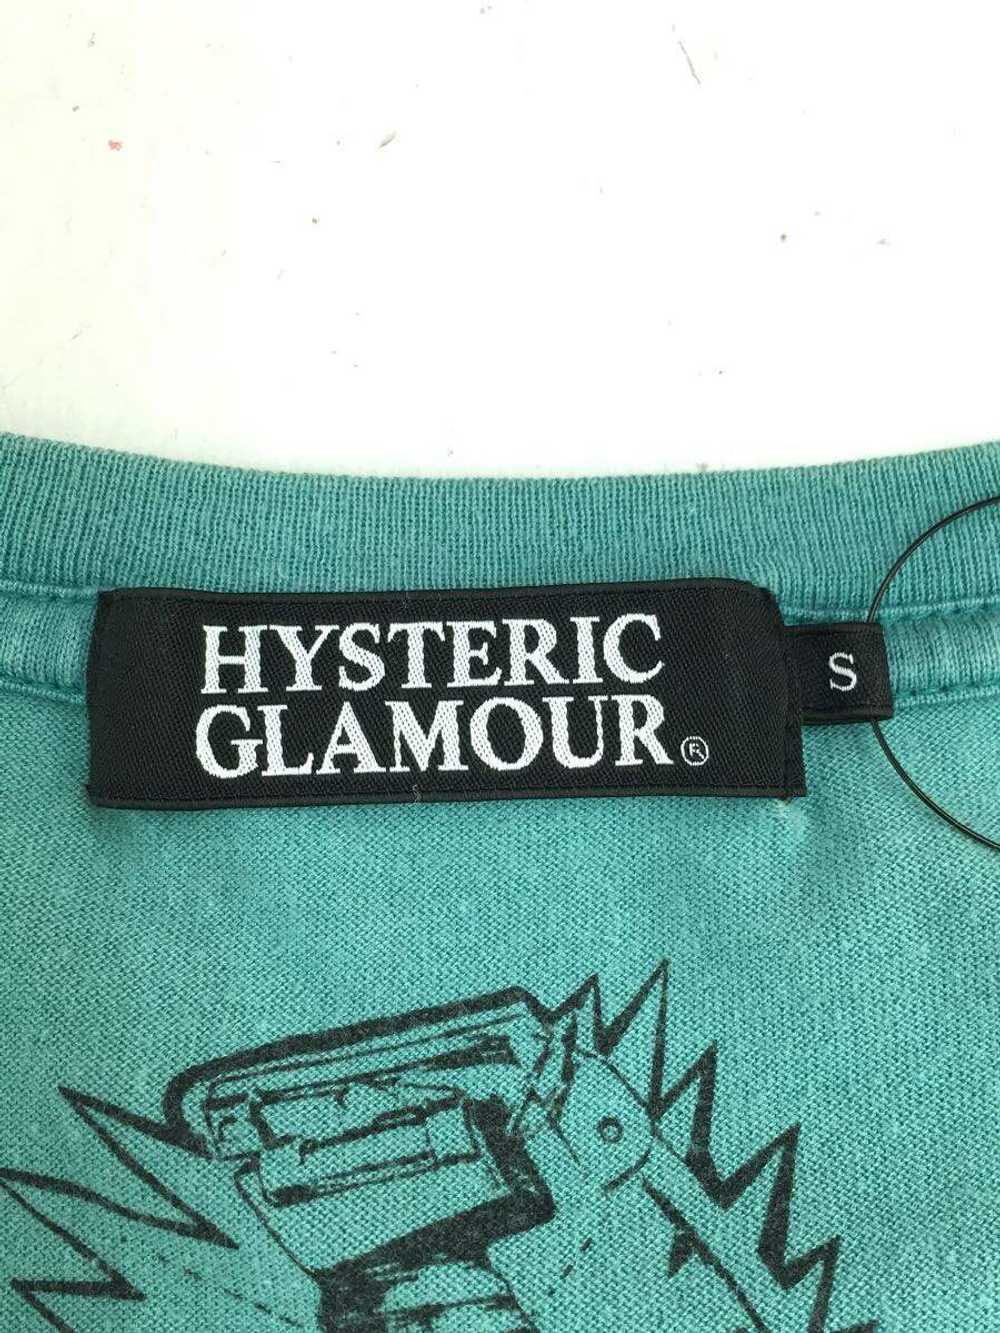 Used Hysteric Glamor T-Shirt/S/Cotton/Grn/0251Ct2… - image 3